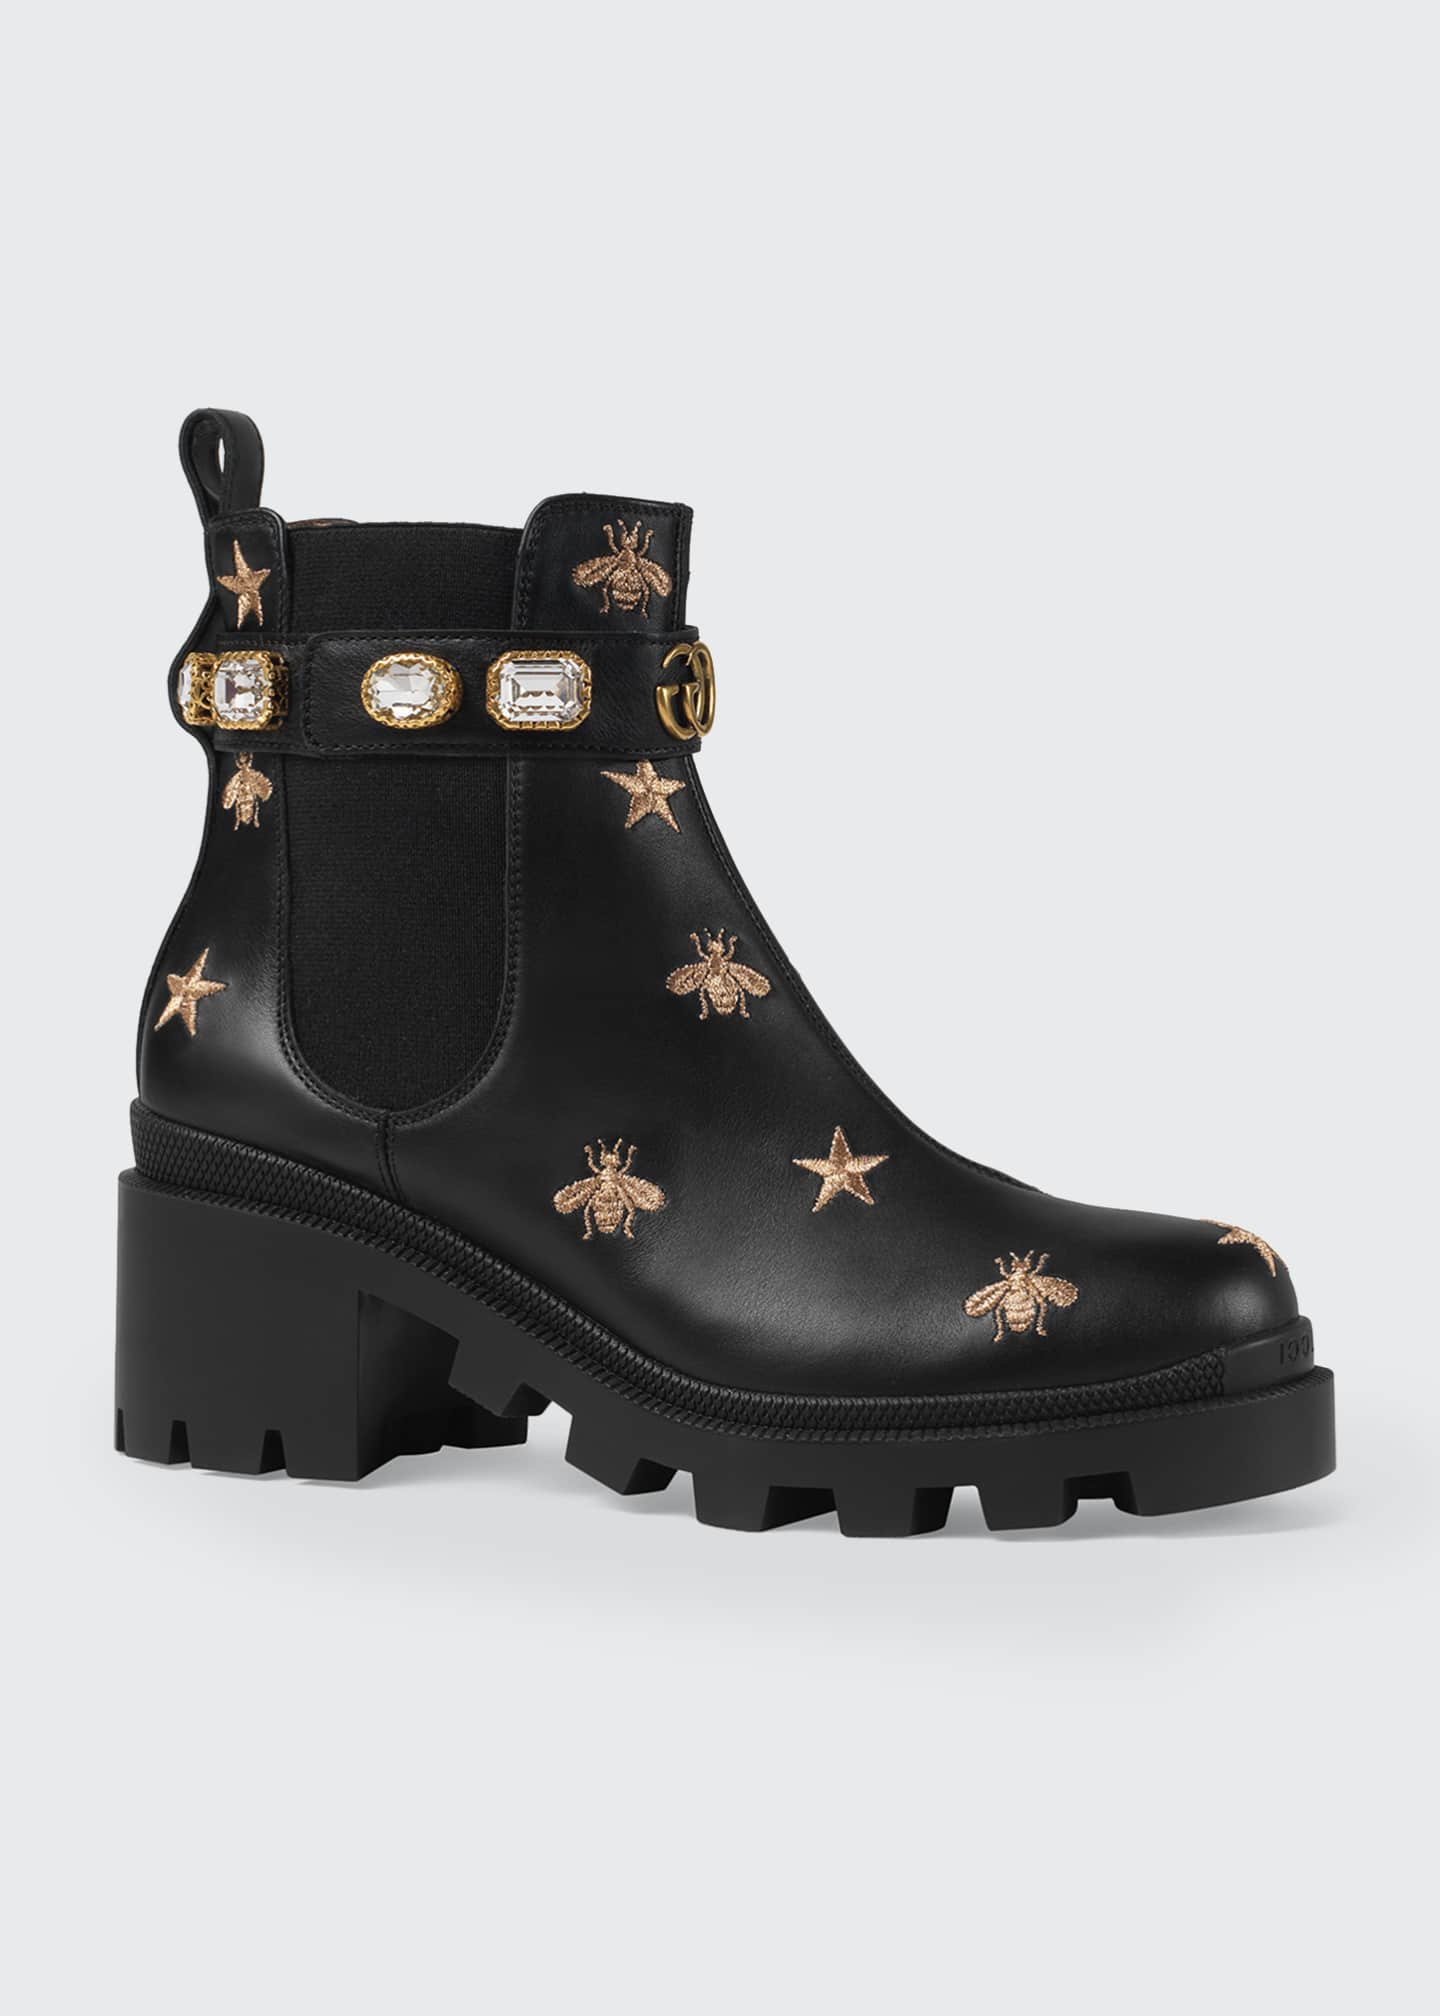 gucci bumble bee boots